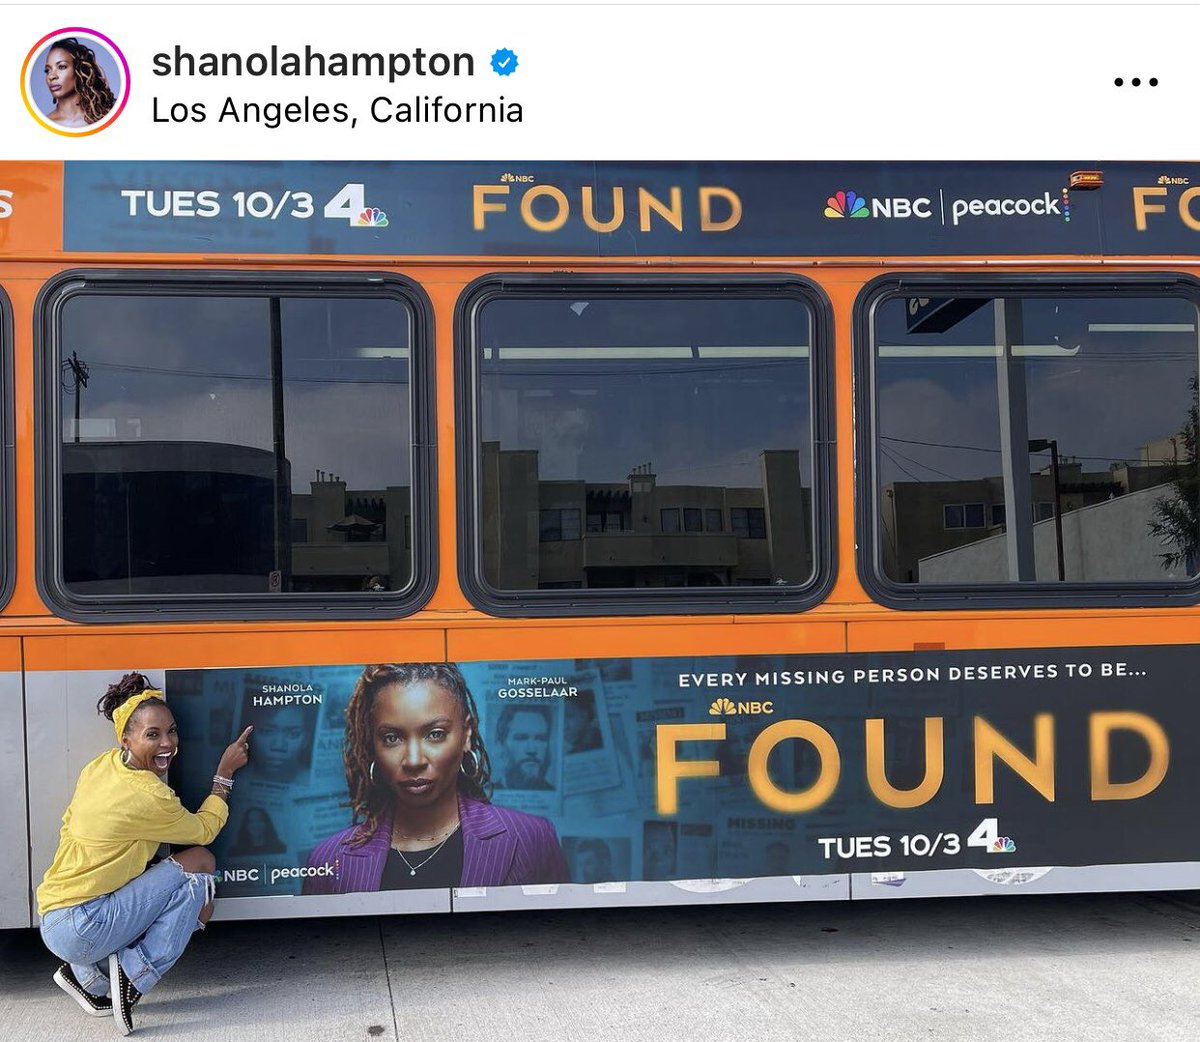 Oh it’s Tuesday & I’m ready!!! 🍿 

For those in the back who need to know... 👁👁 

#FoundNBC #NBCFound
@ 10pm et every Tuesday

That means no phone calls, no texts & definitely don’t stop by to chitchat. 

 #livetweeting @nbc streaming on @peacock @shanolahampton